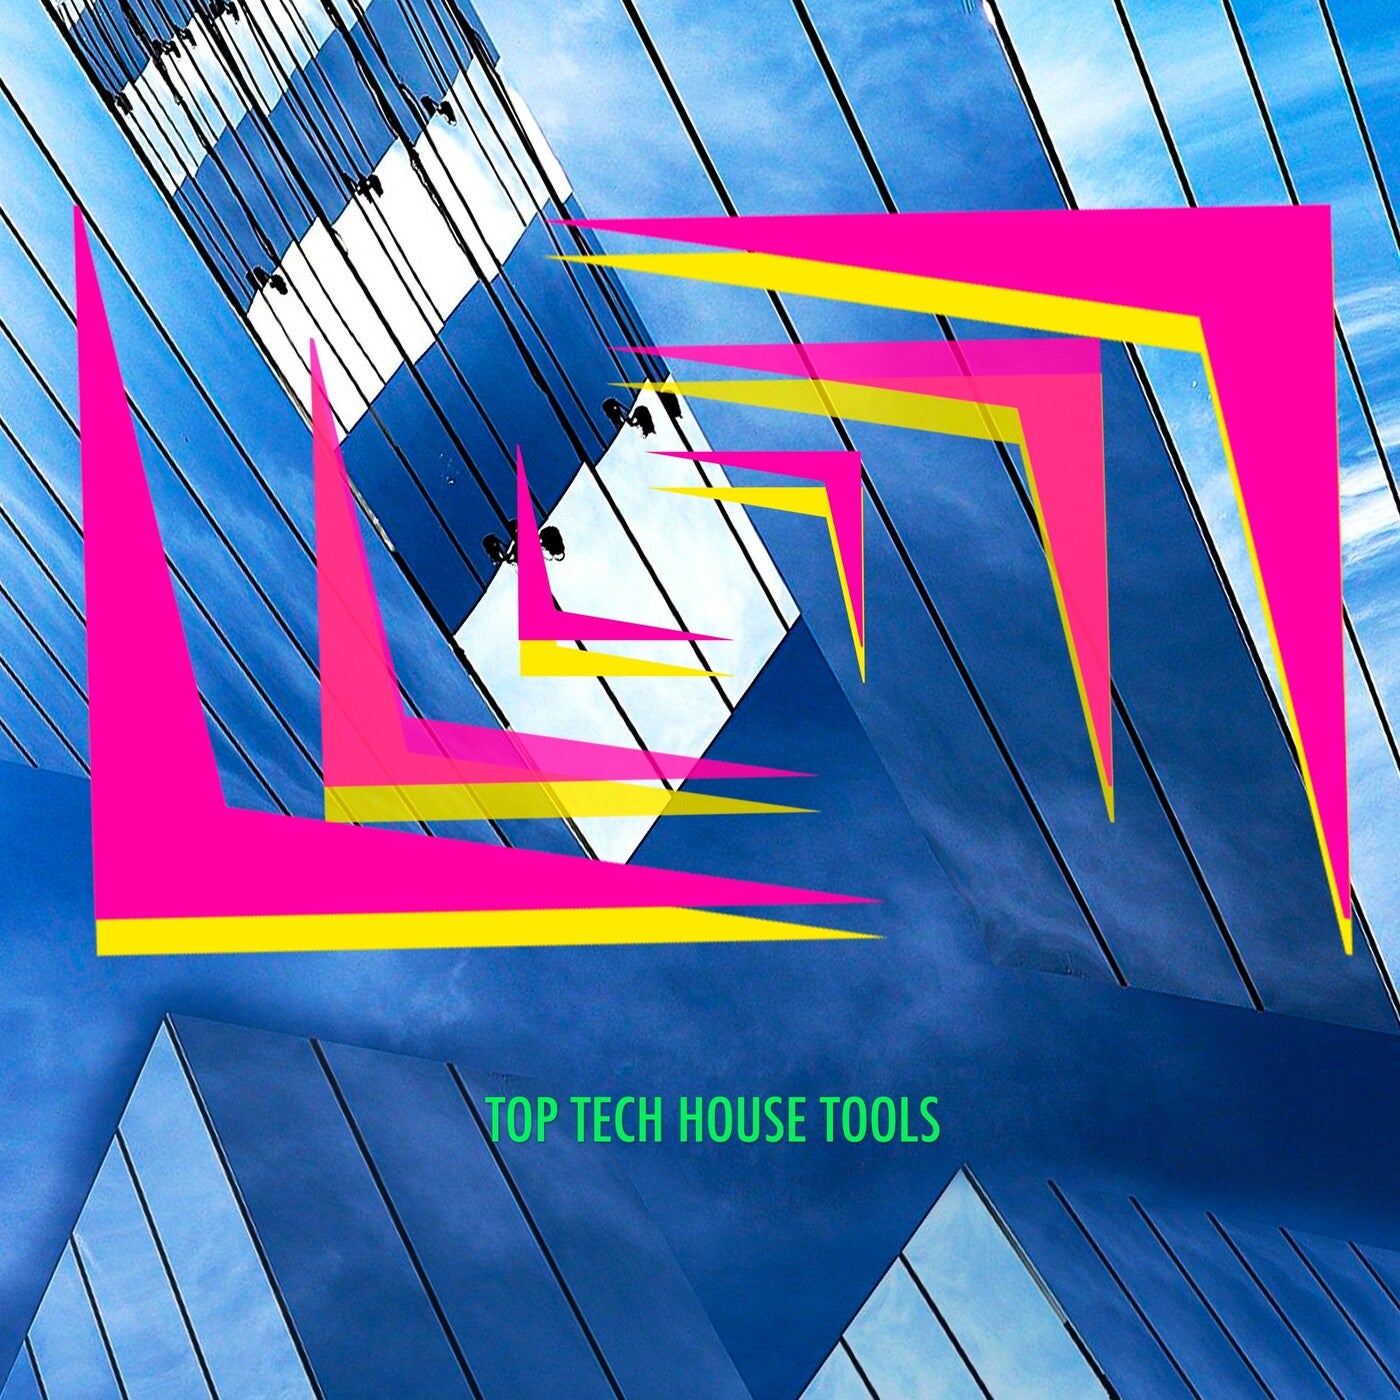 Top Tech House Tools